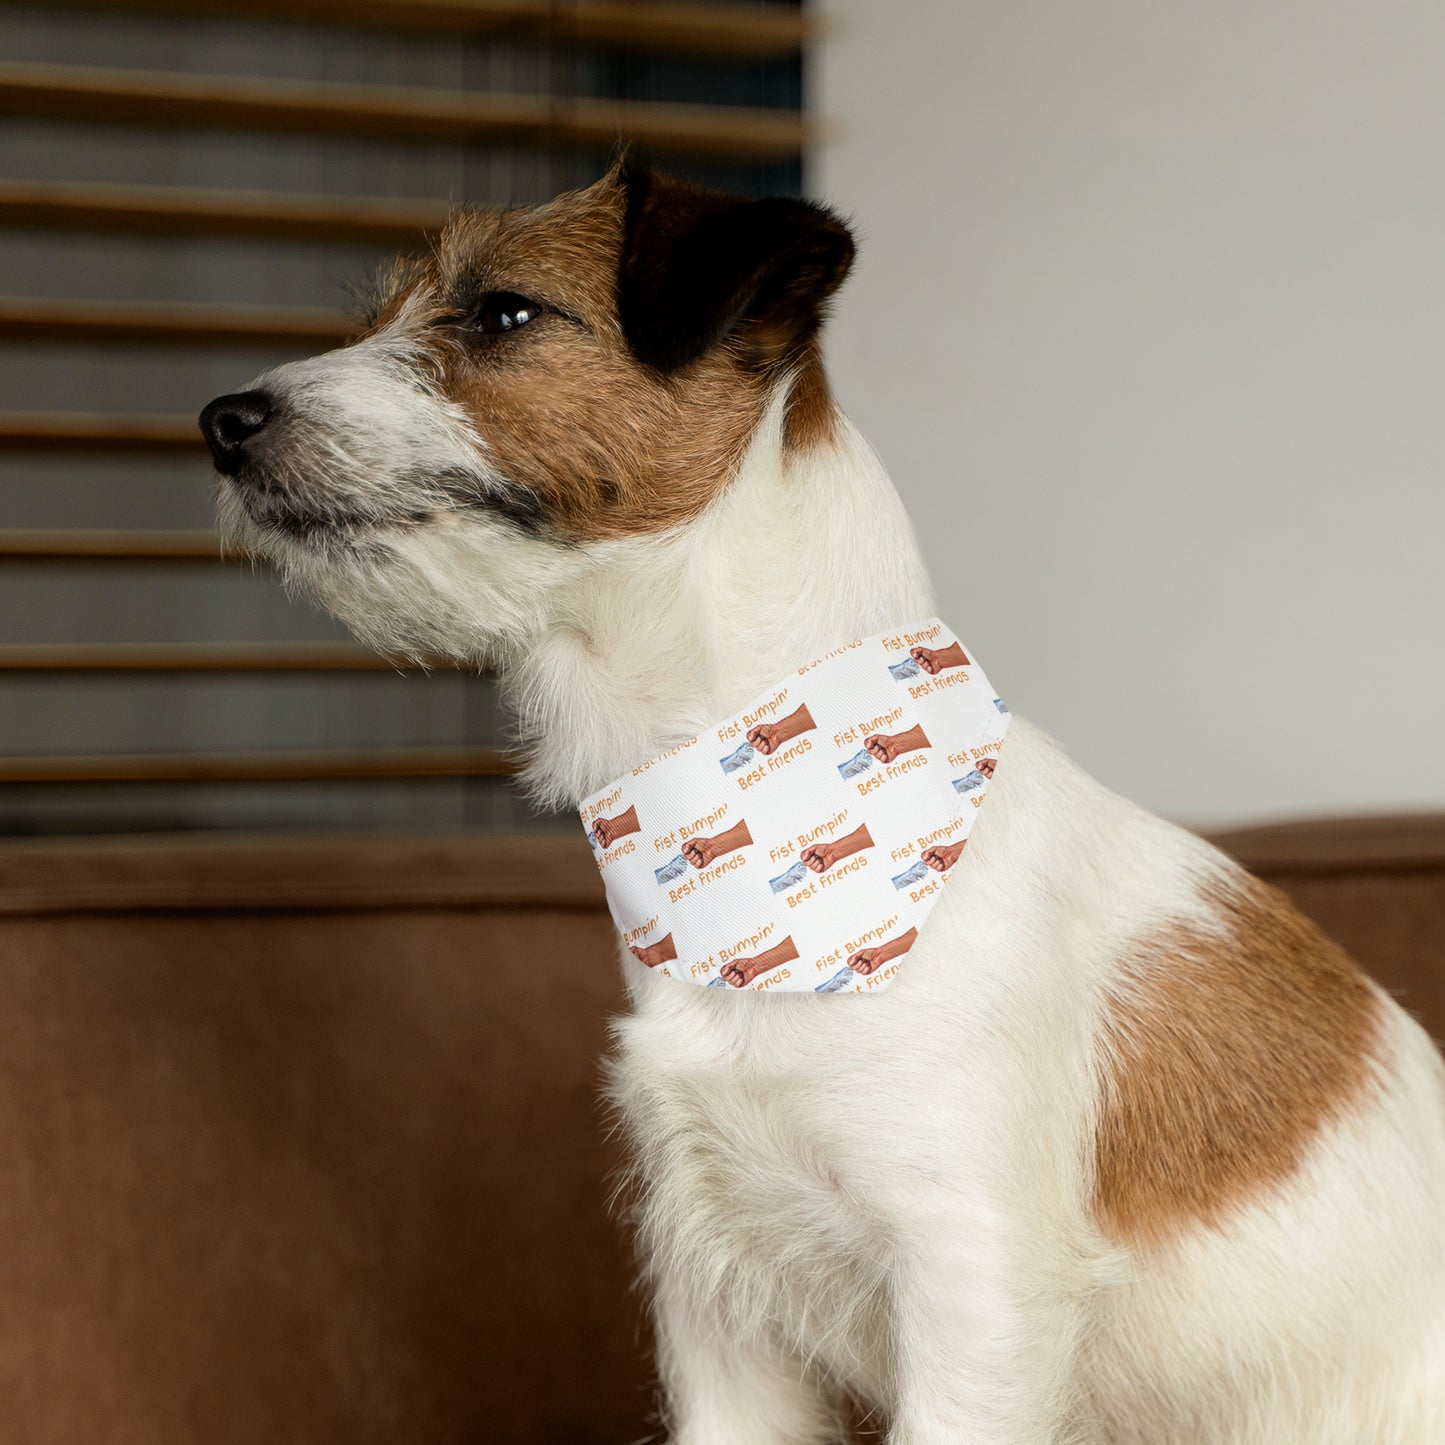 Fist Bumpin’ Best Friends Opie’s Cavalier King Charles Spaniel Paw Pet Bandana Collar White with Gold lettering.